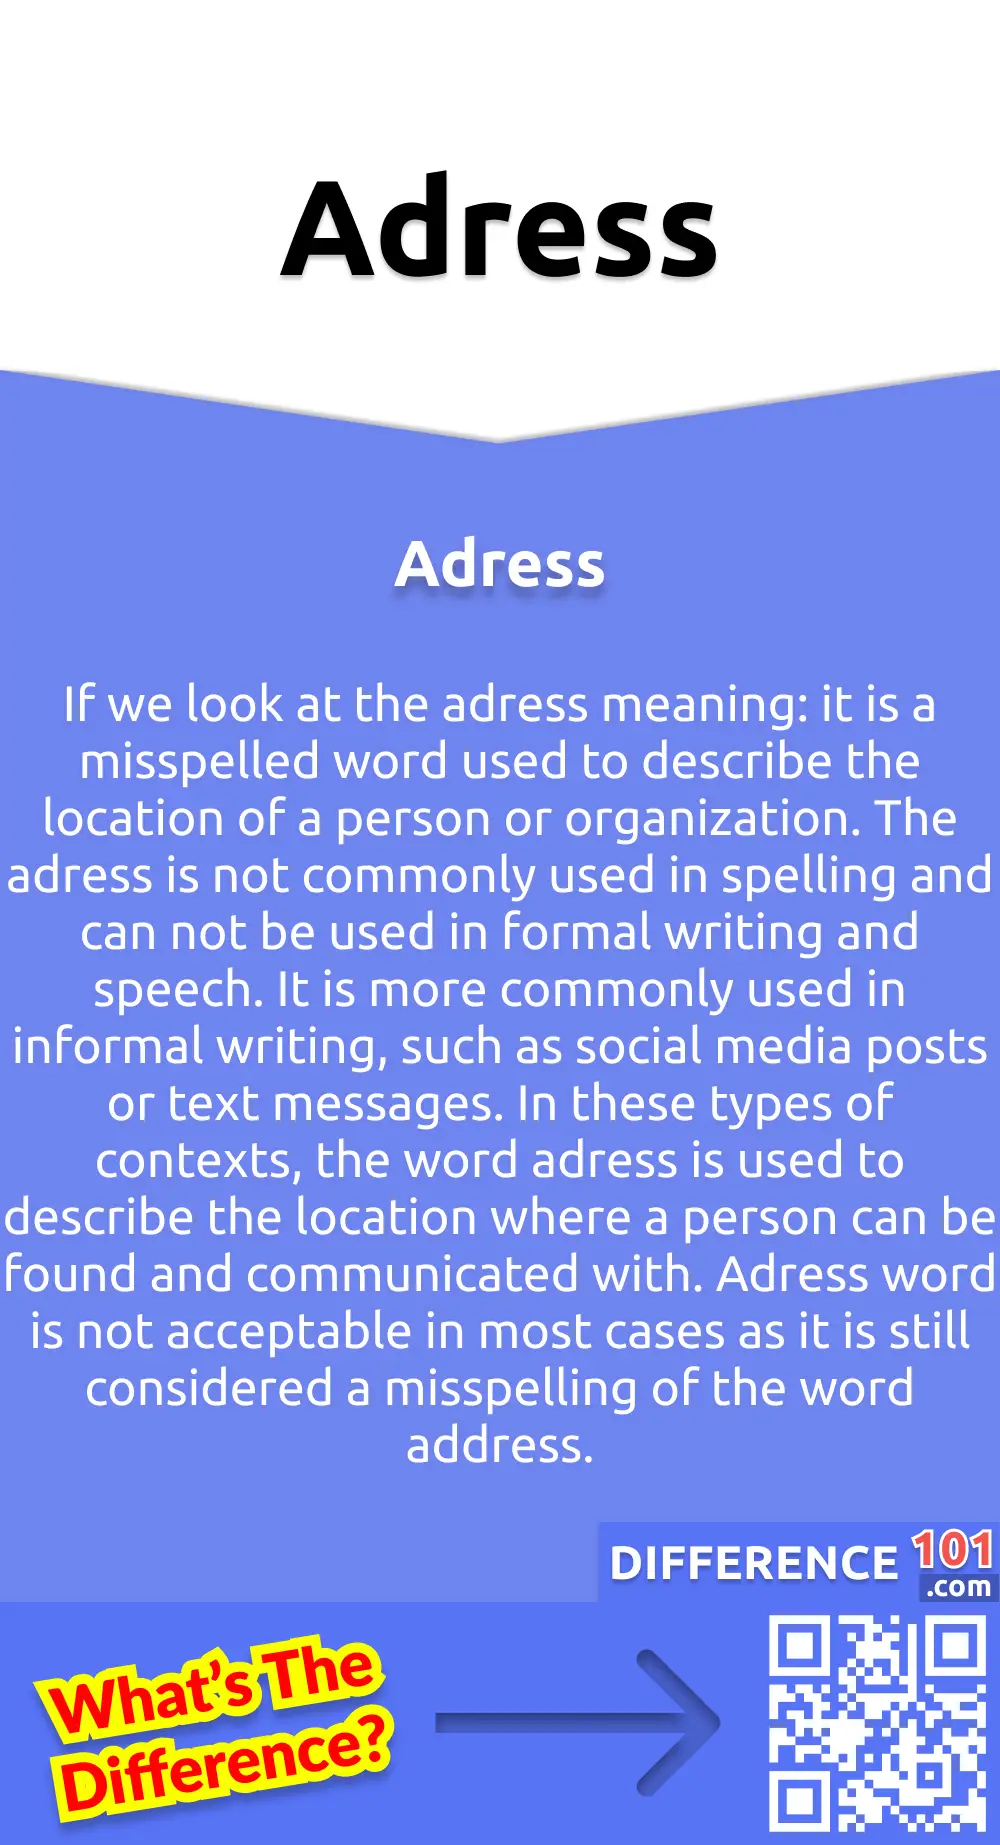 What Is Adress? If we look at the adress meaning: it is a misspelled word used to describe the location of a person or organization. The adress is not commonly used in spelling and can not be used in formal writing and speech. It is more commonly used in informal writing, such as social media posts or text messages. In these types of contexts, the word adress is used to describe the location where a person can be found and communicated with. Adress word is not acceptable in most cases as it is still considered a misspelling of the word address. Therefore this word cannot be used in academic writing or professional writing. Some examples of adress in informal speech are, “Tell me your adress, and I will send you your delivery?" or "I have told you my adress hundred times.”